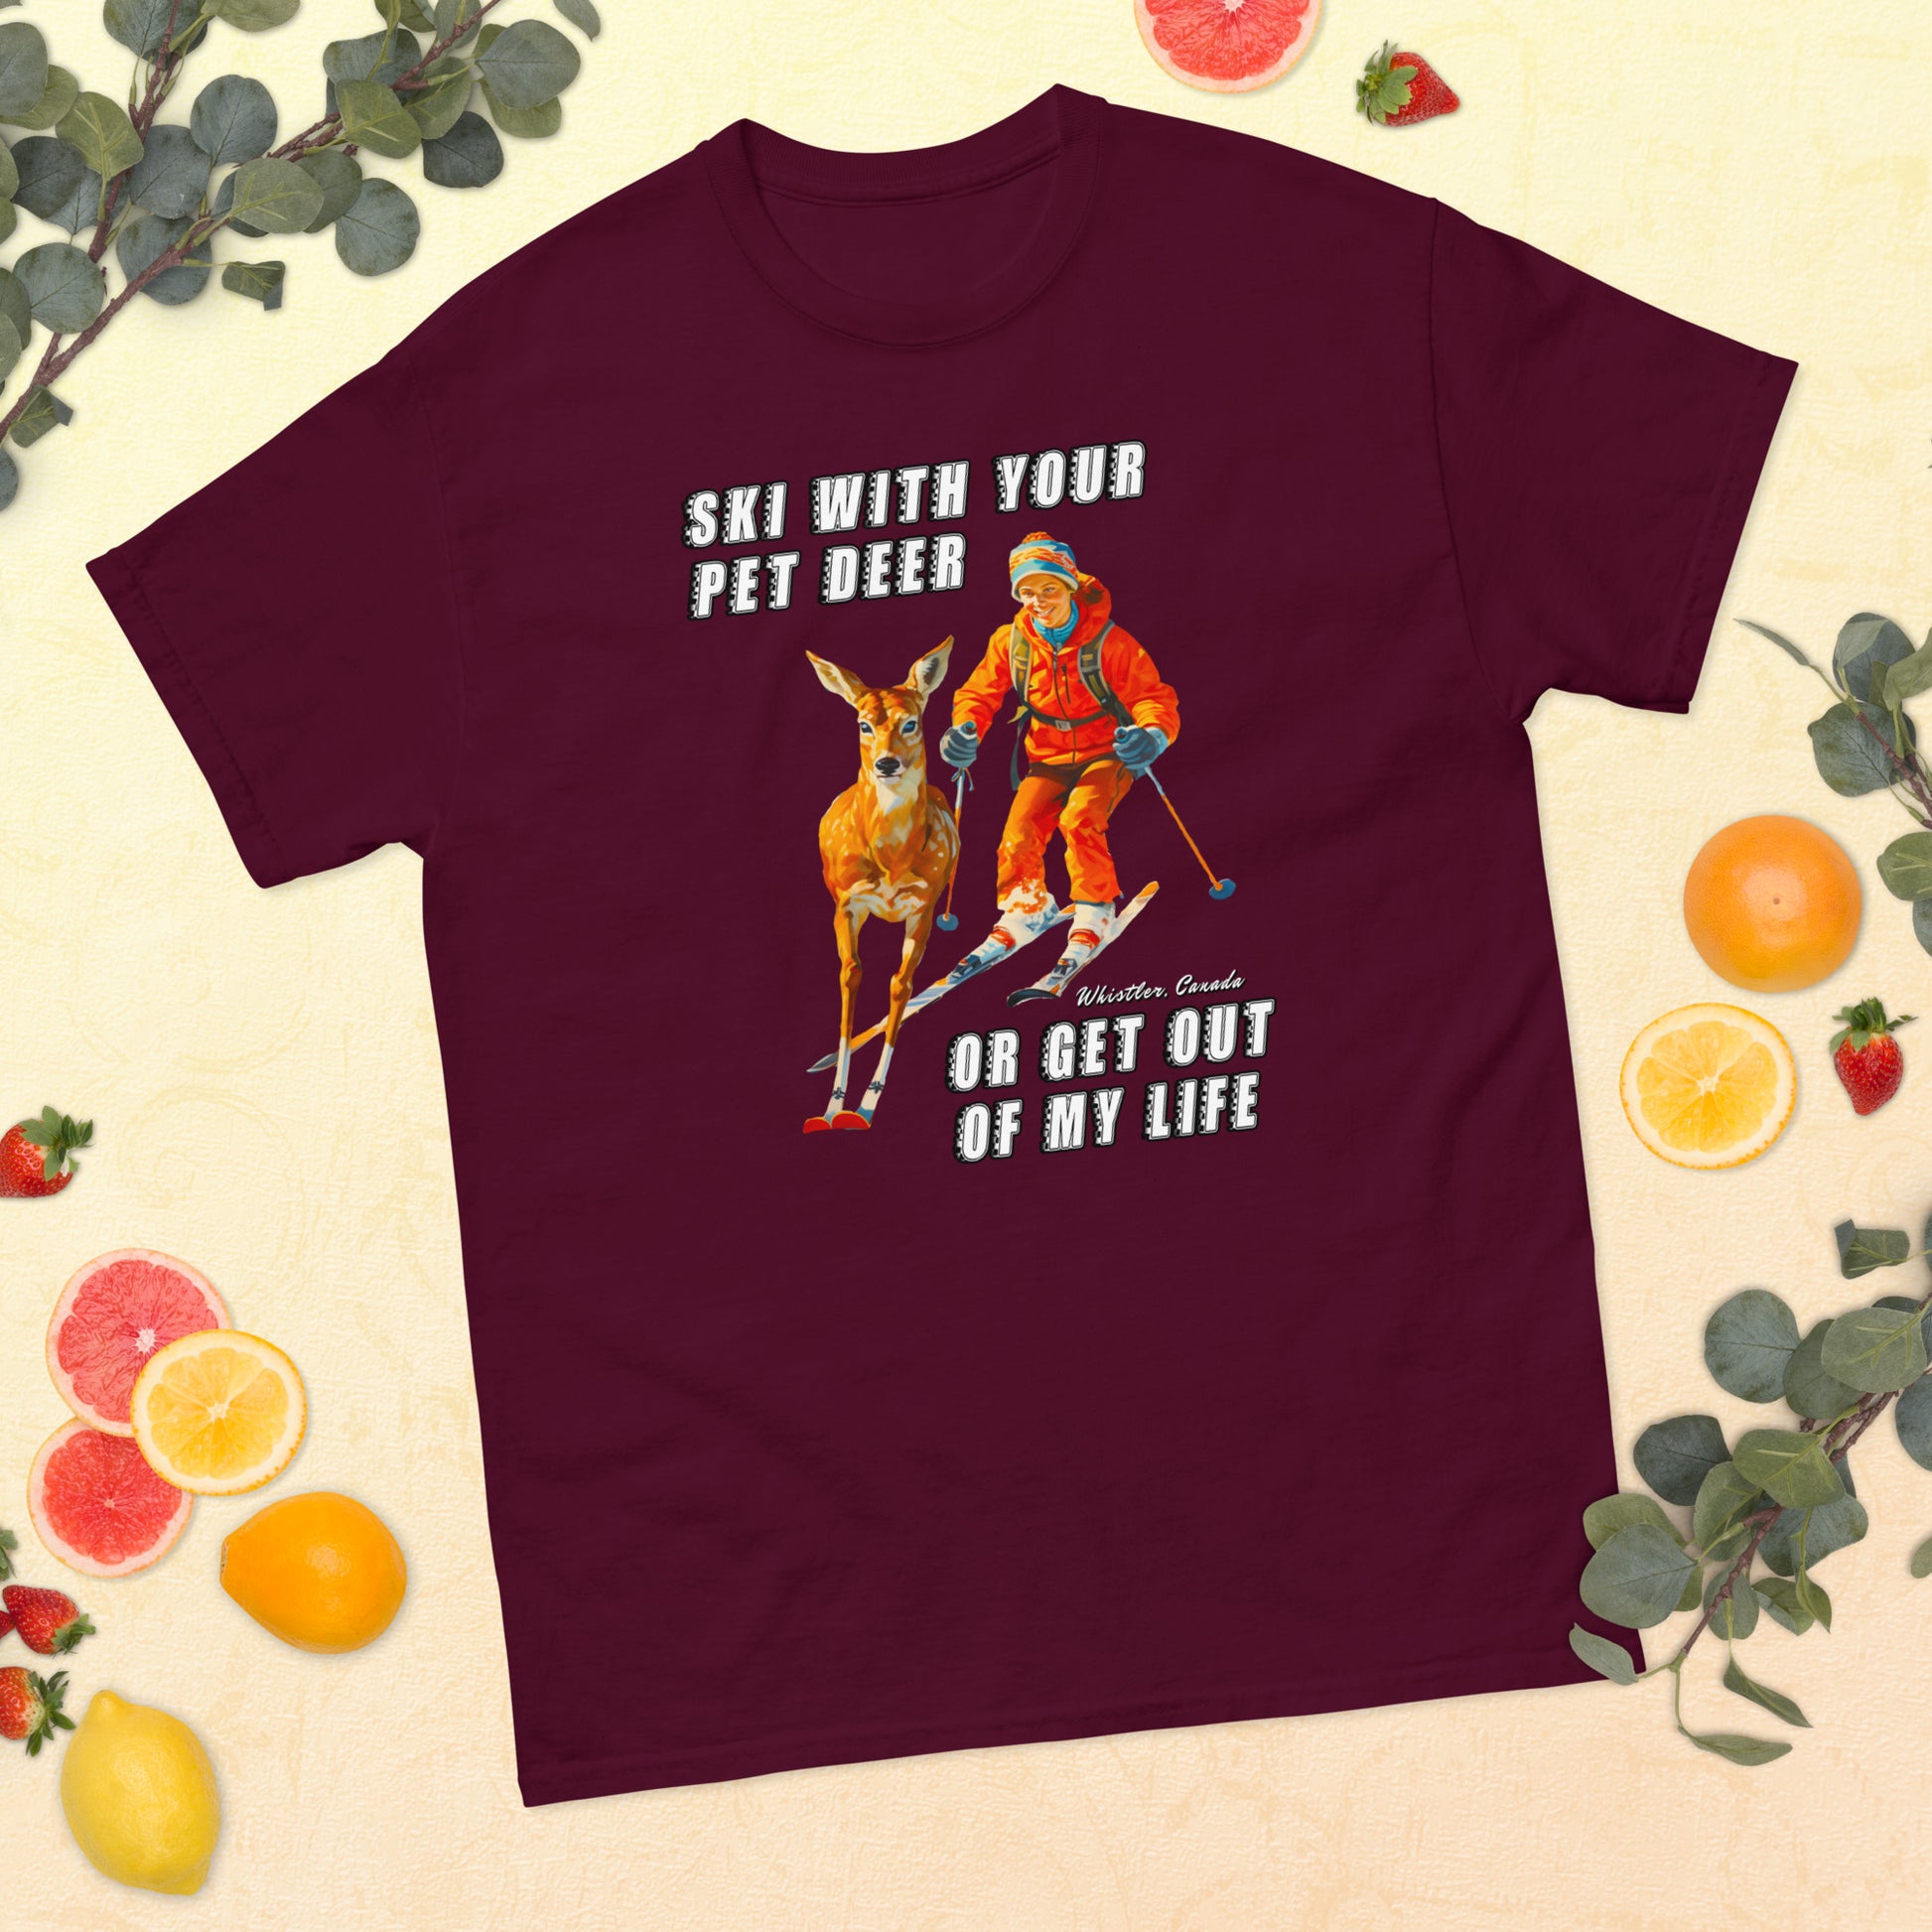 Ski with your pet deer or get out of my life printed t-shirt by whistler shirts